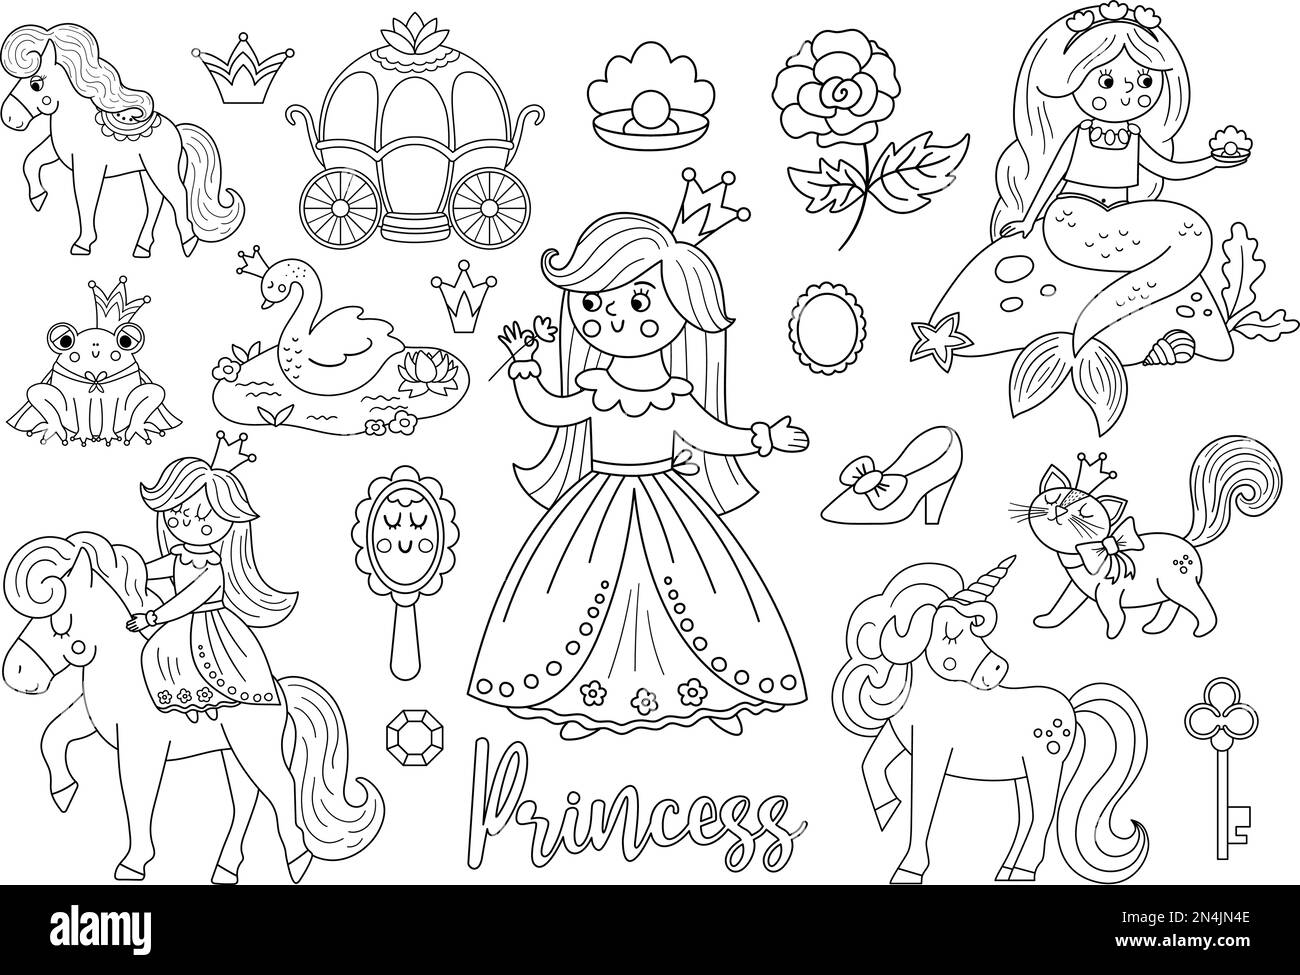 Fairy tale black and white princess collection. Big line vector set of fantasy girl, carriage, mermaid, unicorn frog prince, swan. Medieval fairytale Stock Vector